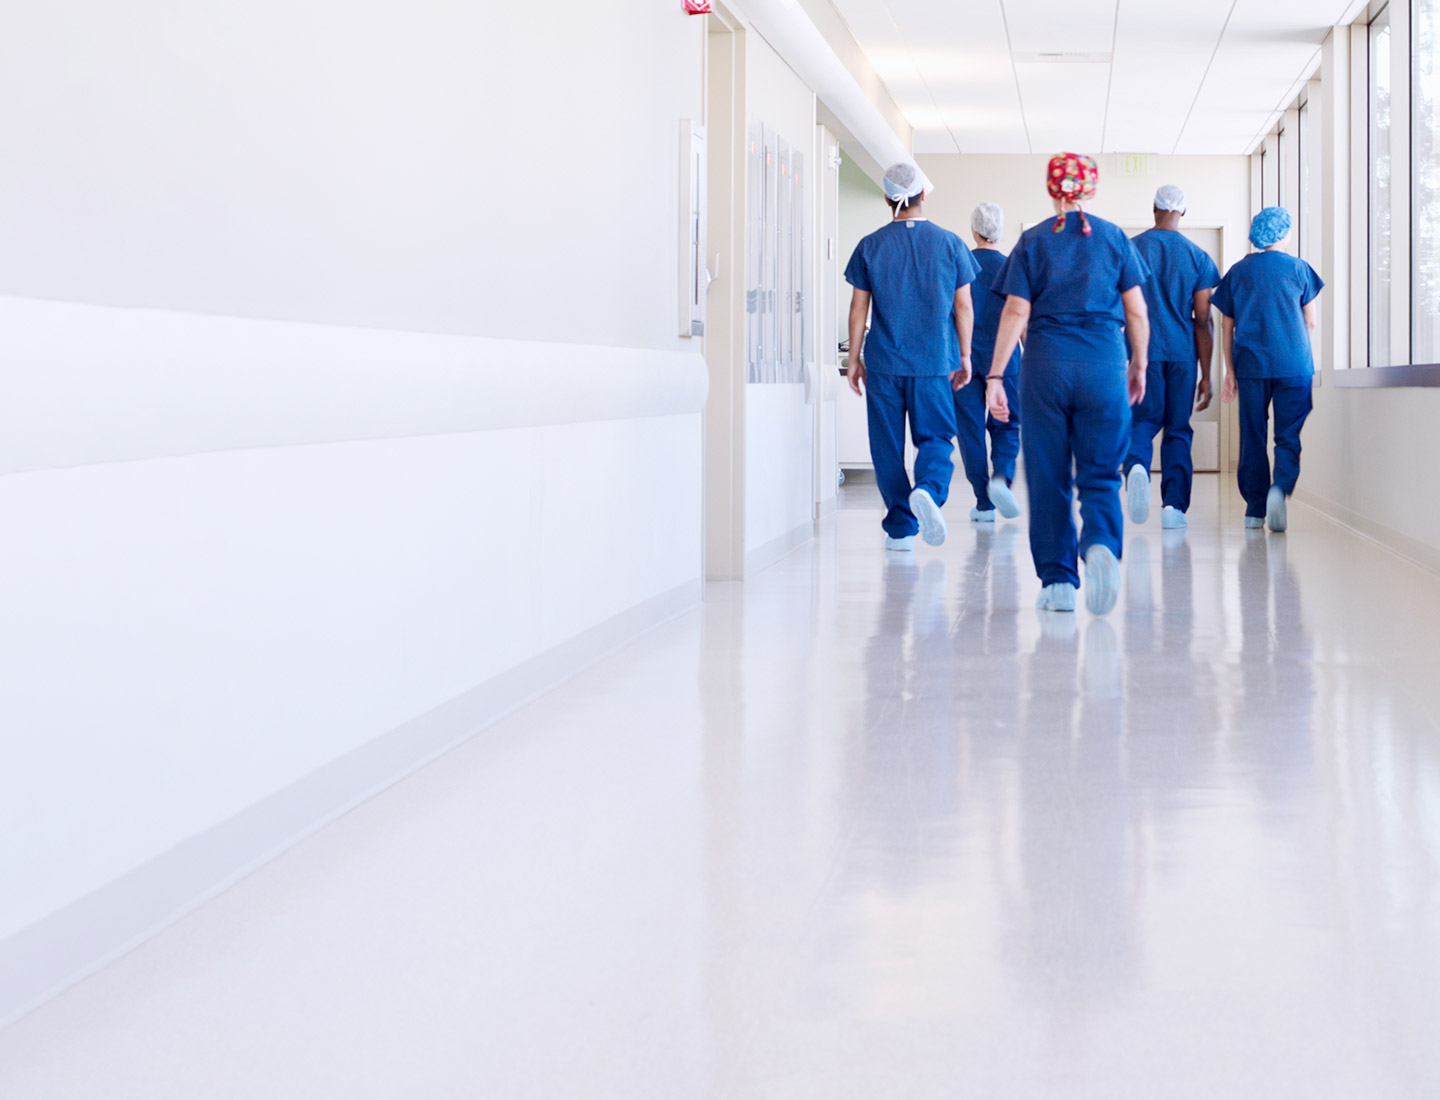 Image of nurses dressed in blue protective clothing walking down a hospital corridor